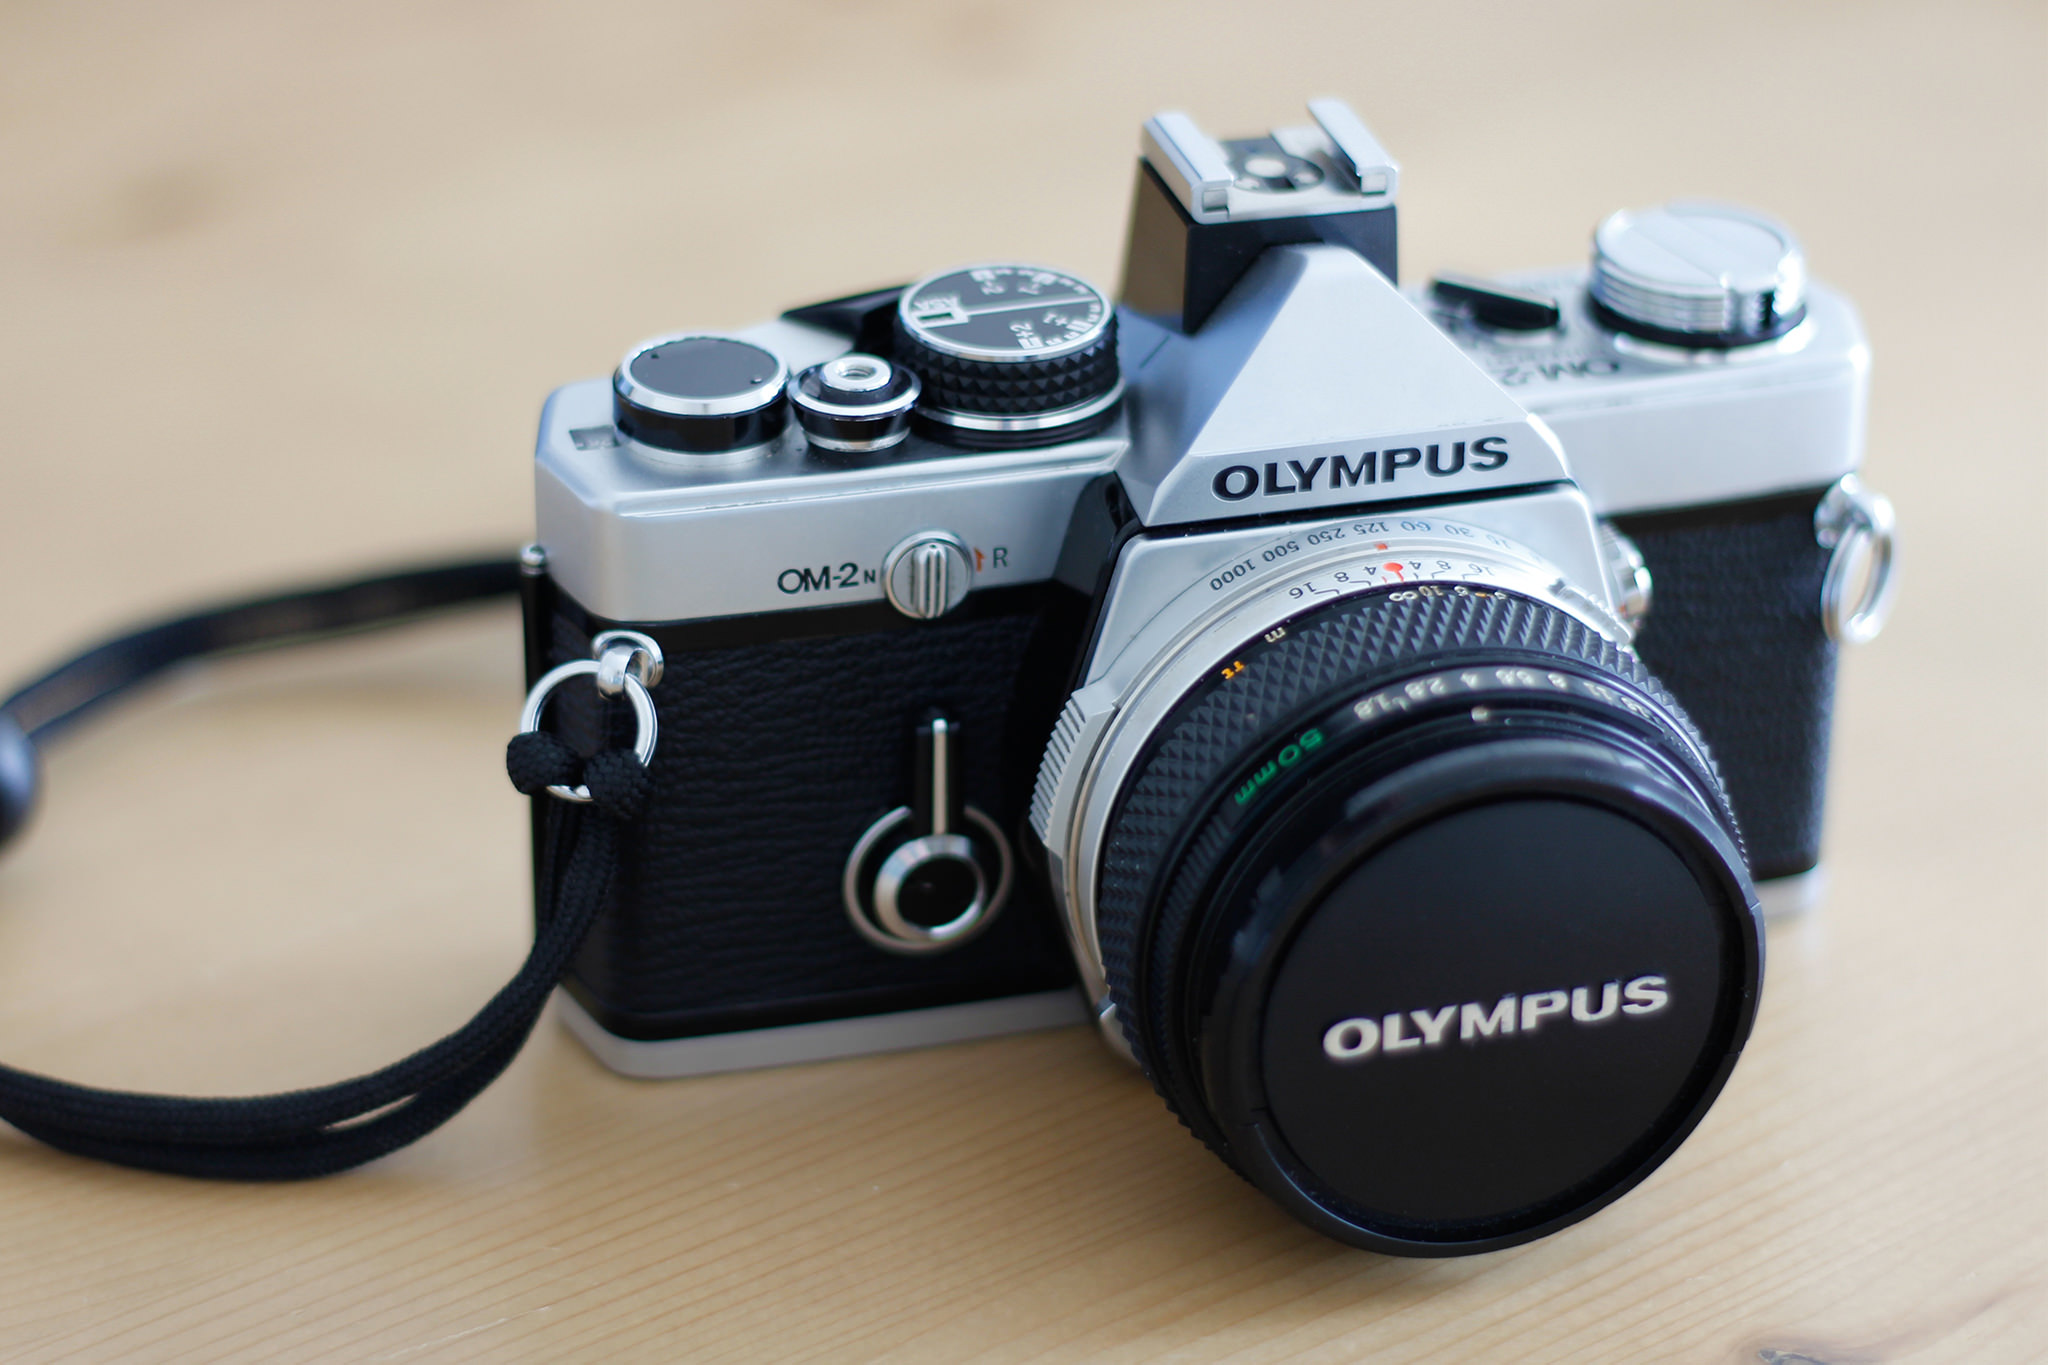 Olympus OM-2n - Learn more about the 35mm SLR camera